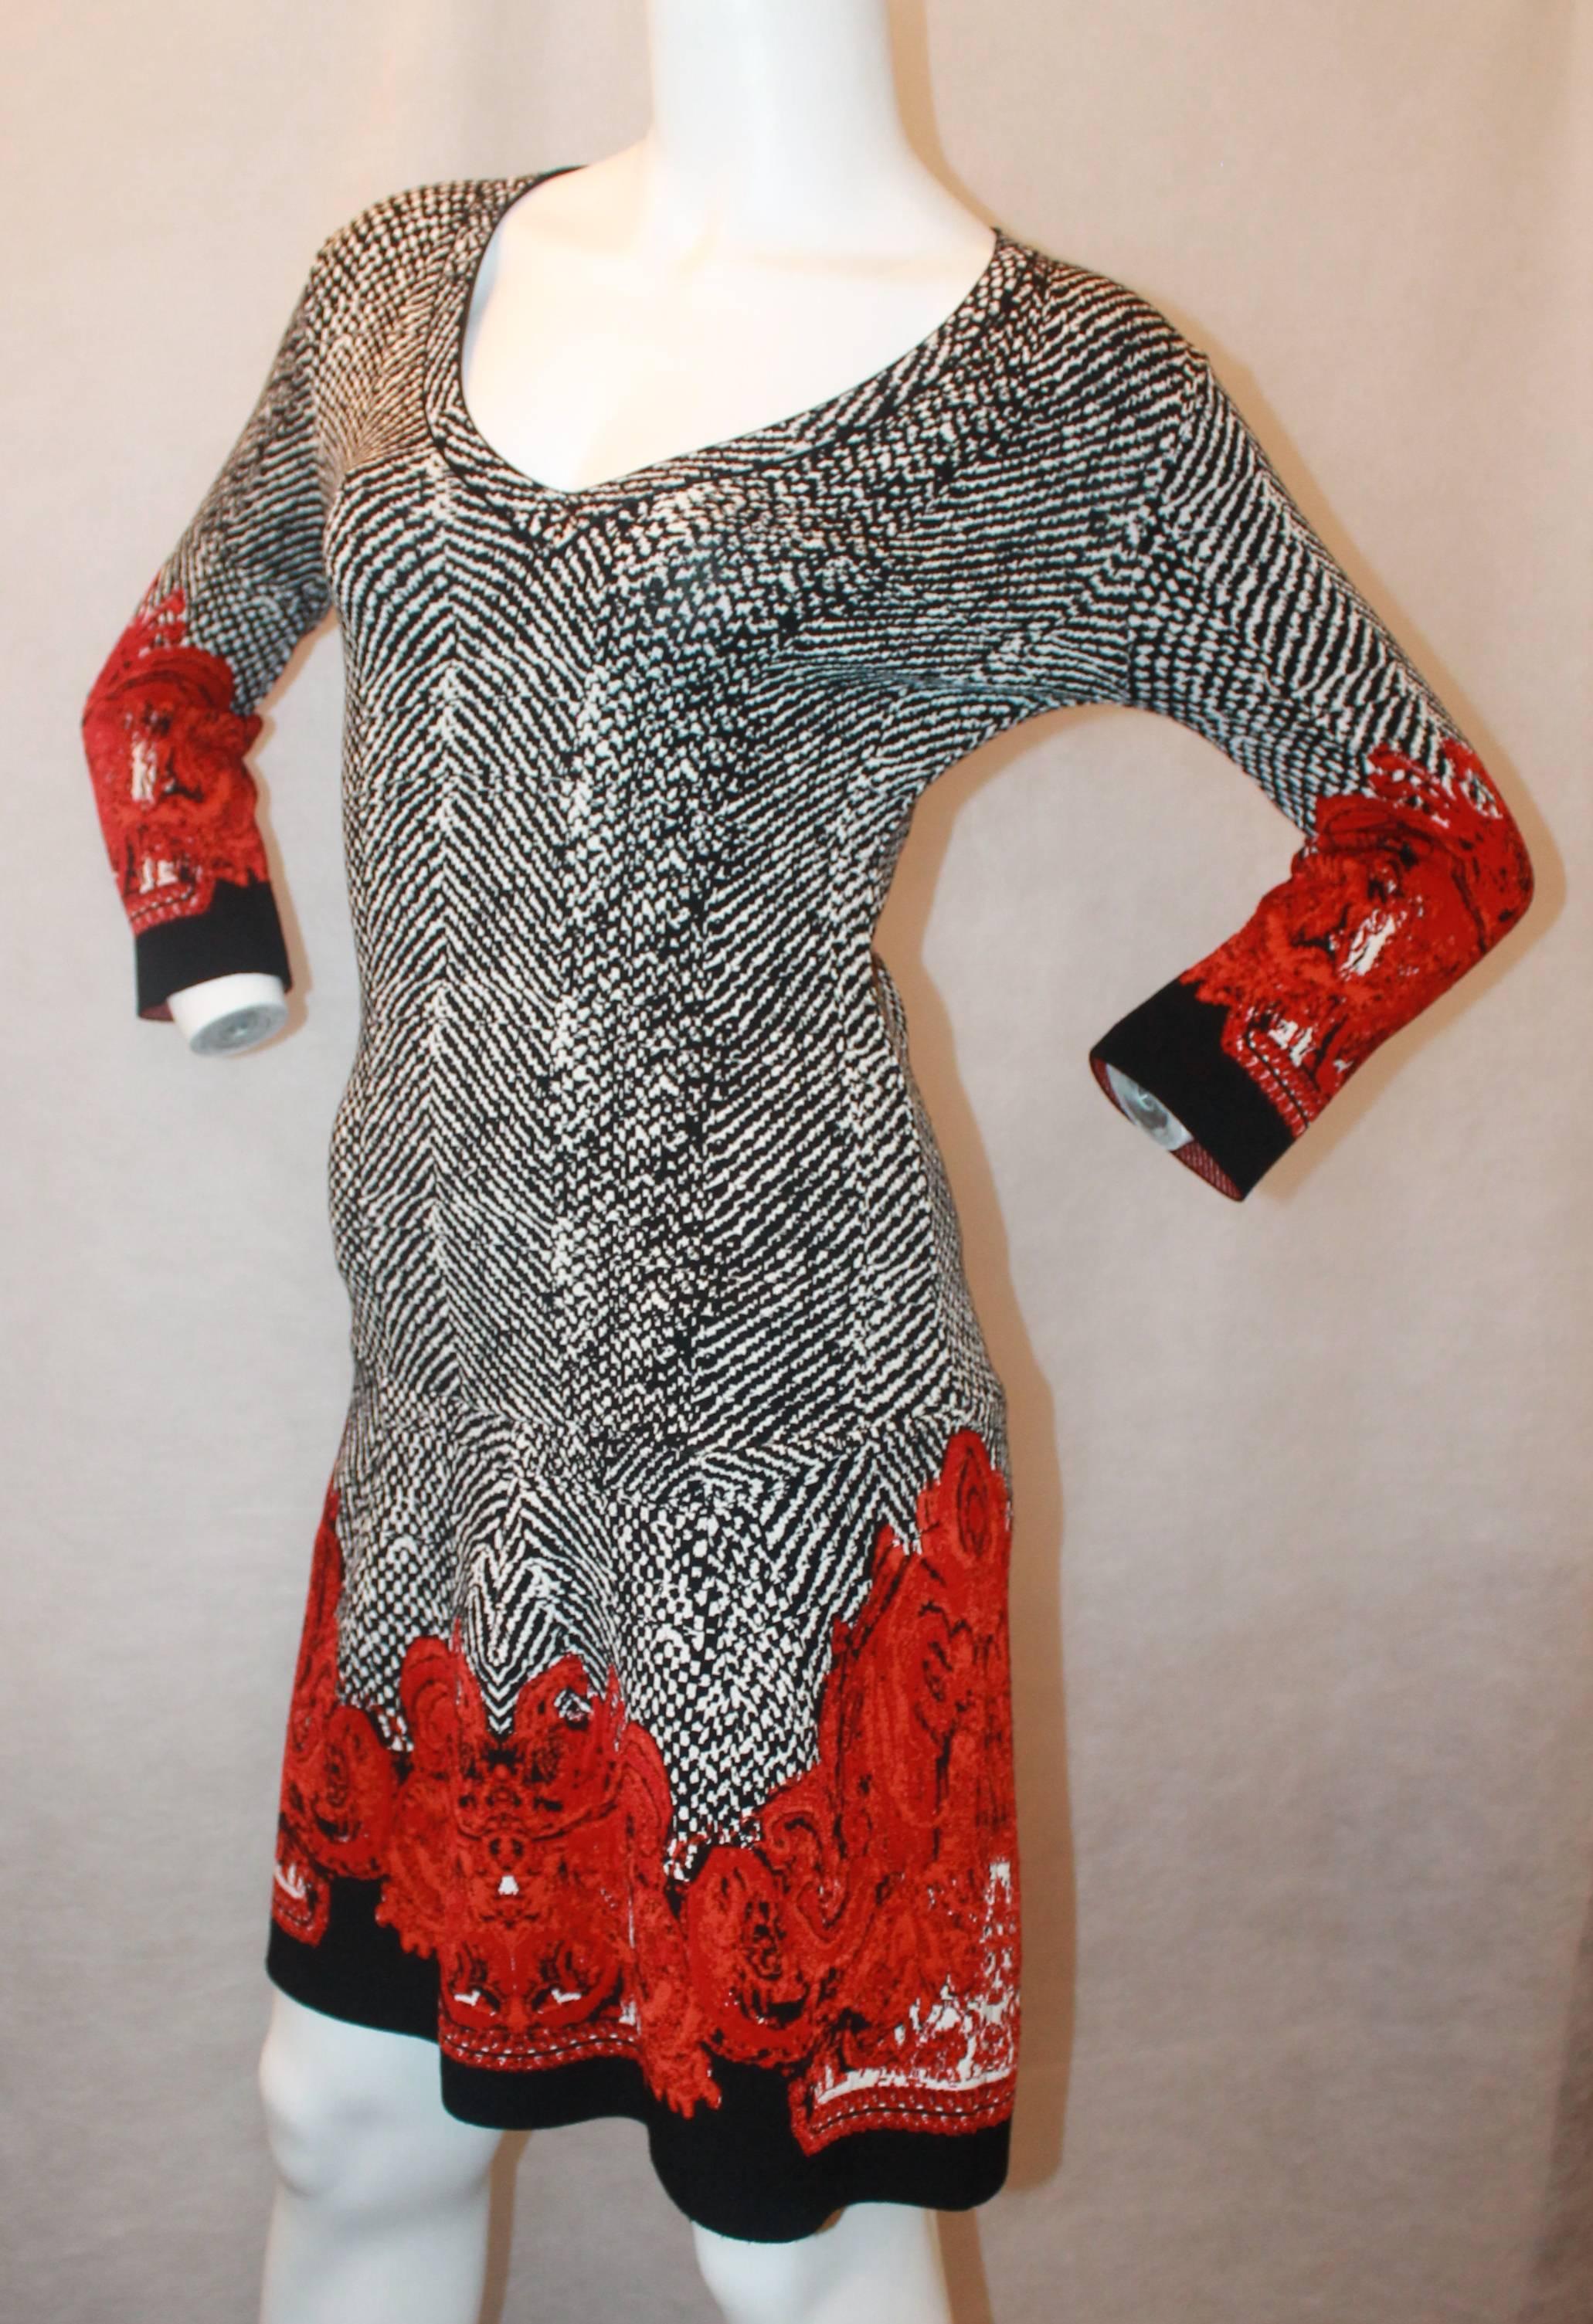 Roberto Cavalli Black, White & Red Printed Long Sleeve Dress - 40. This dress is in excellent condition and has an black & white abstract print all over with a red & red-orange swirl pattern on the bottom & sleeve bottoms. It has a slightly cinched